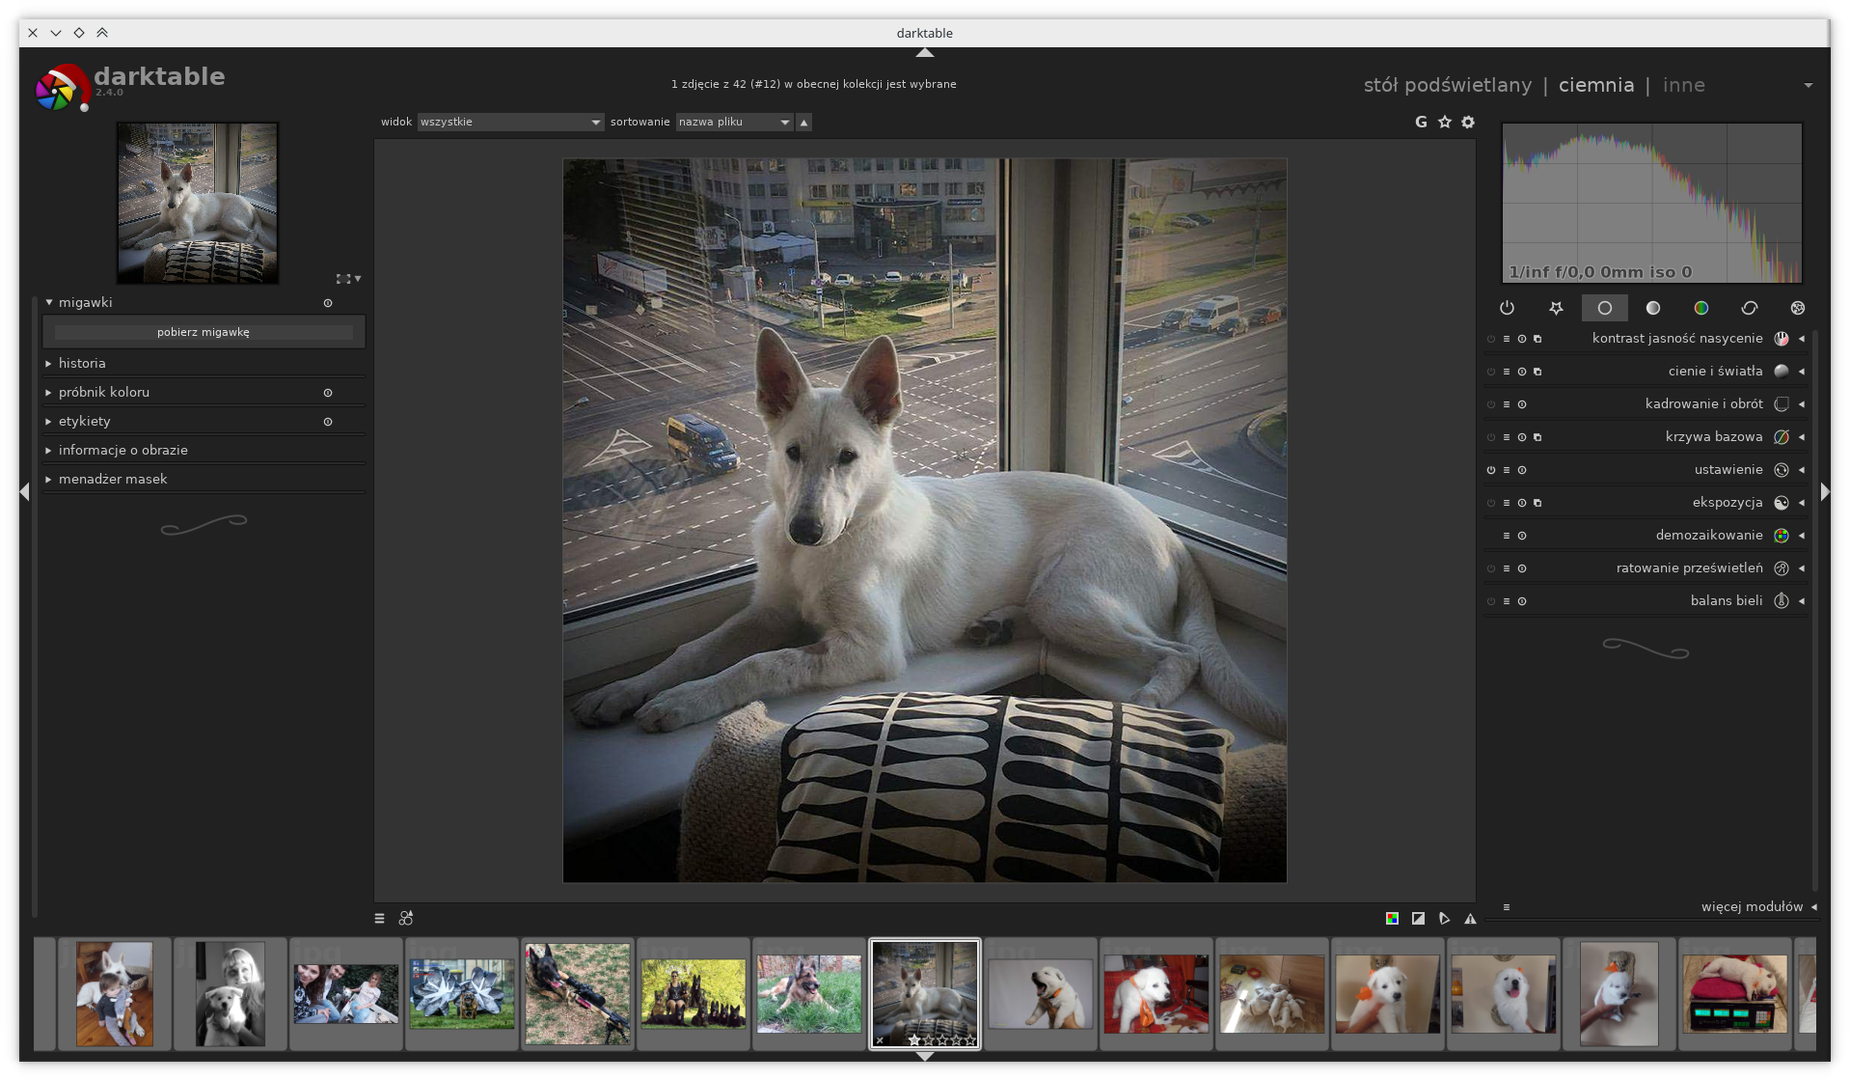 darktable 4.4.0 instal the new for ios